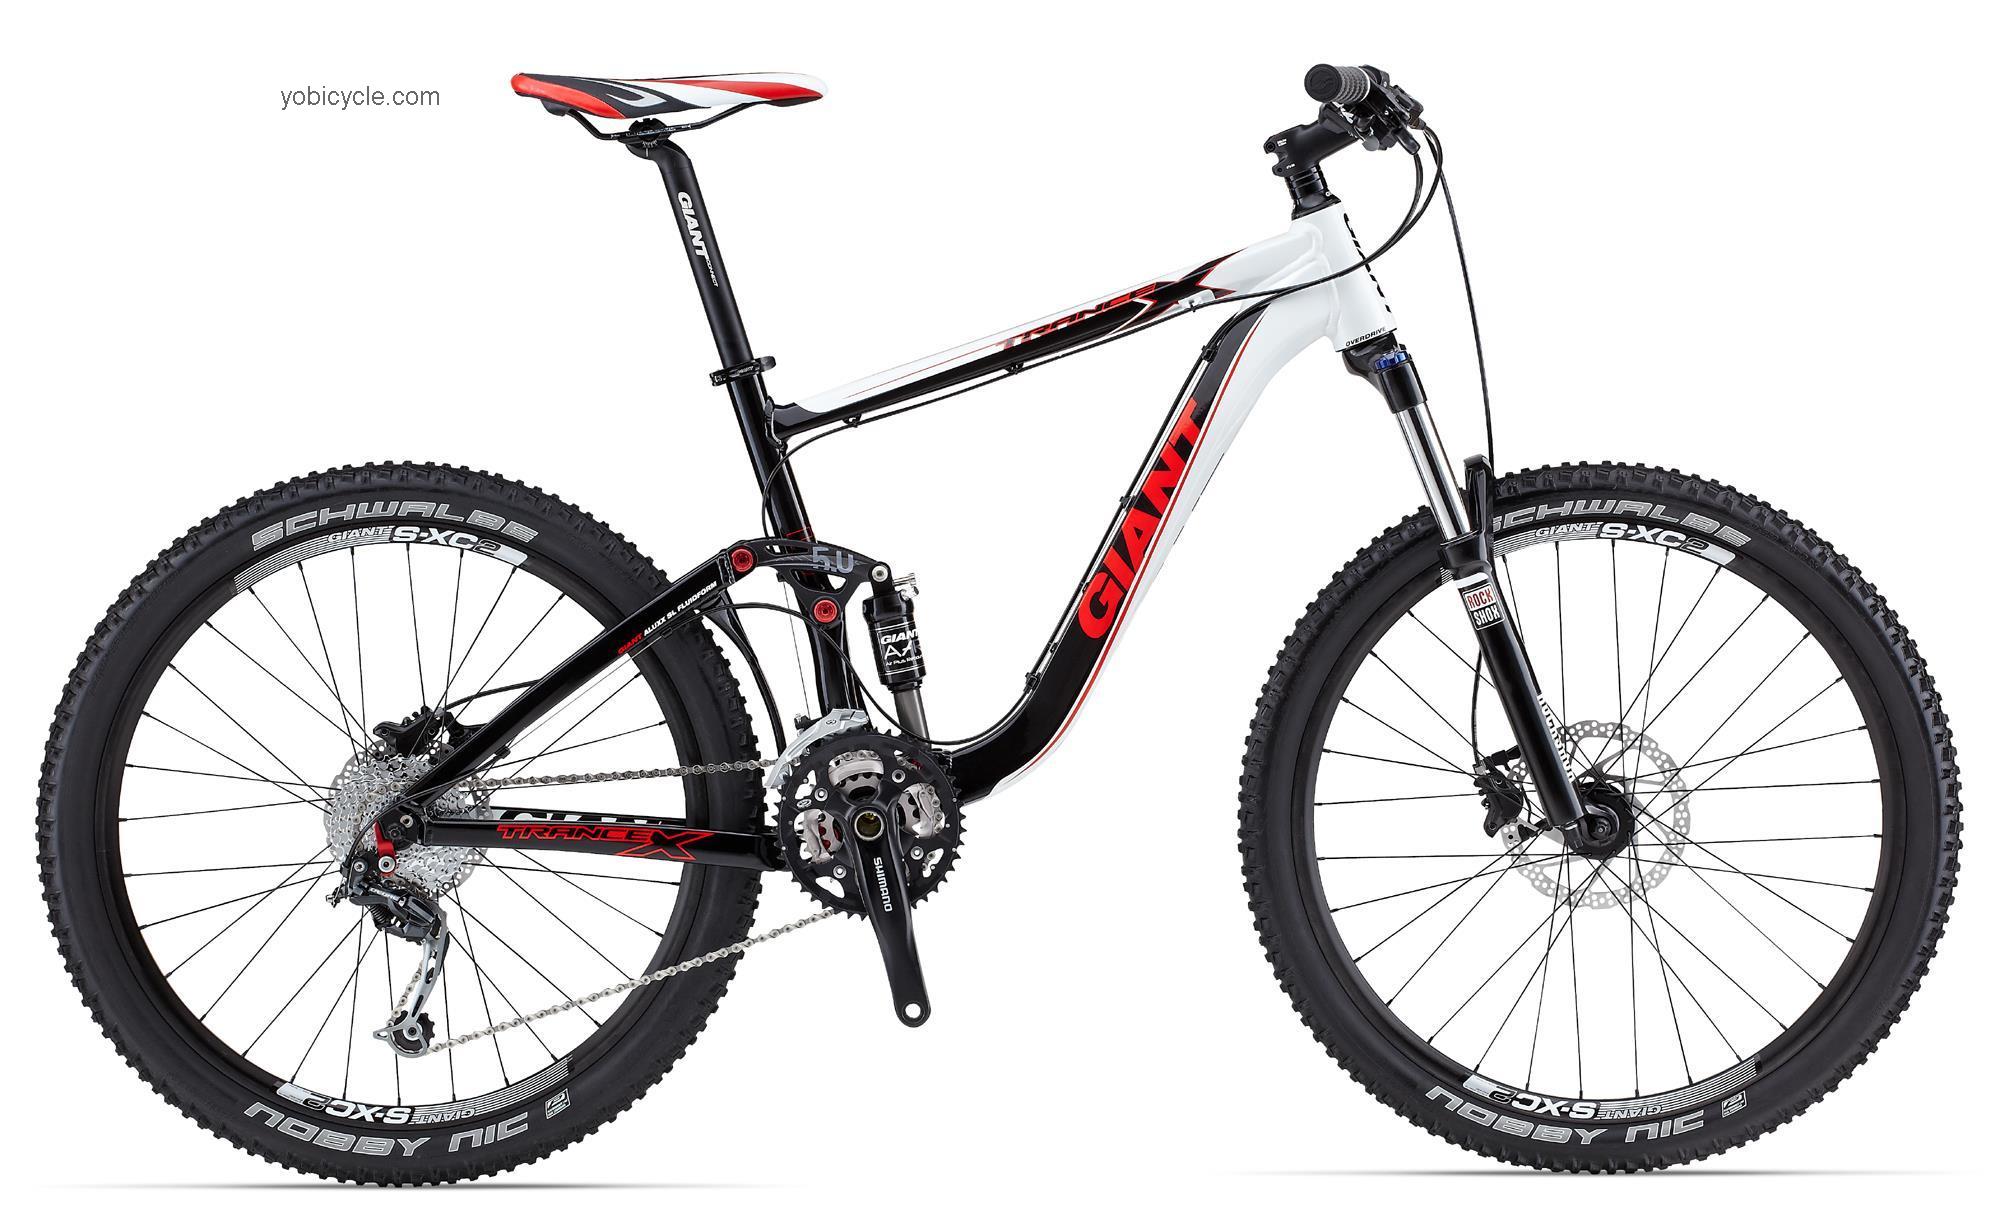 Giant Trance X3 2013 comparison online with competitors